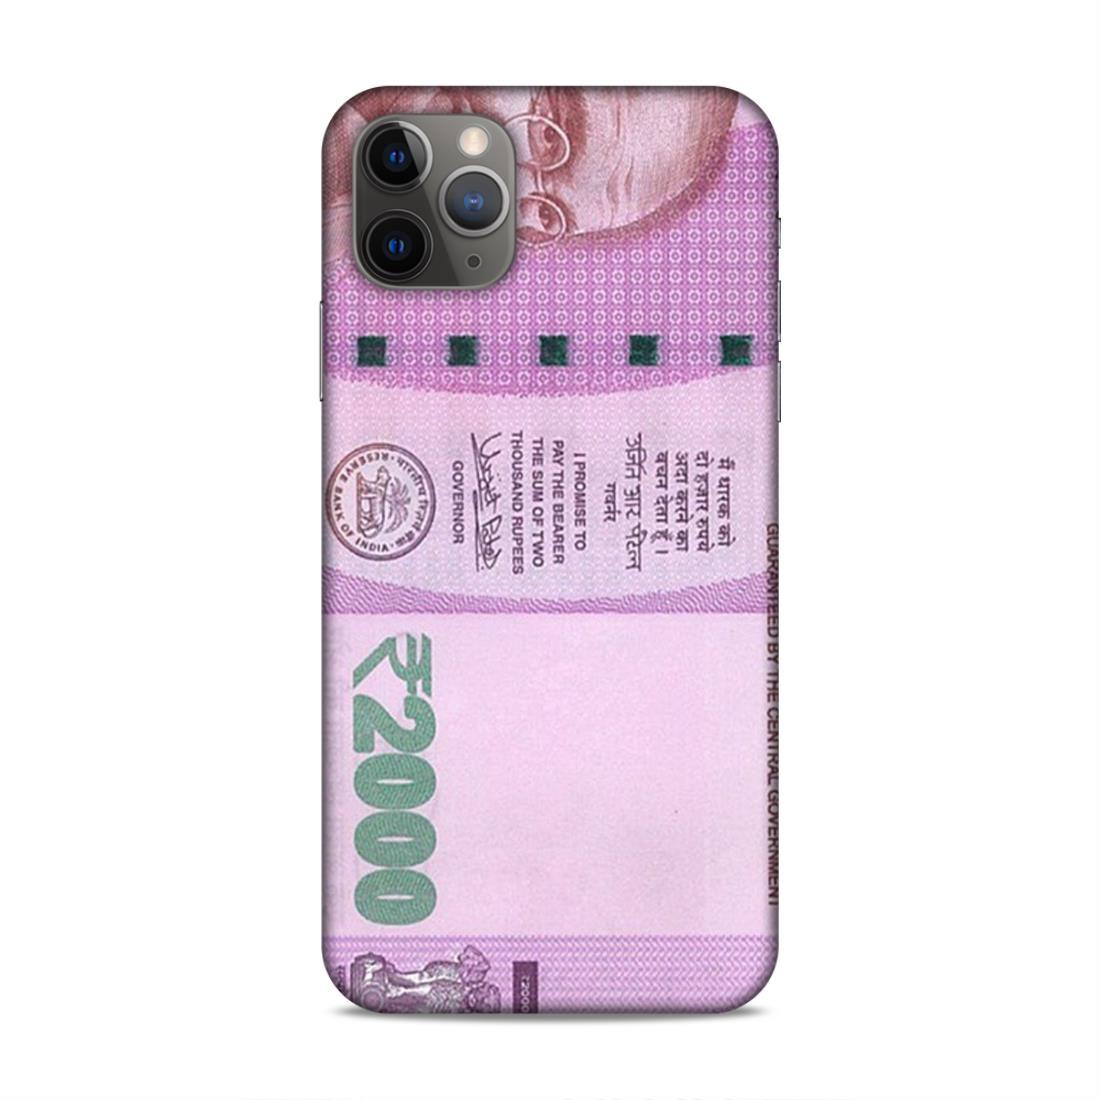 Rs 2000 Currency Note iPhone 11 Pro Max Phone Cover